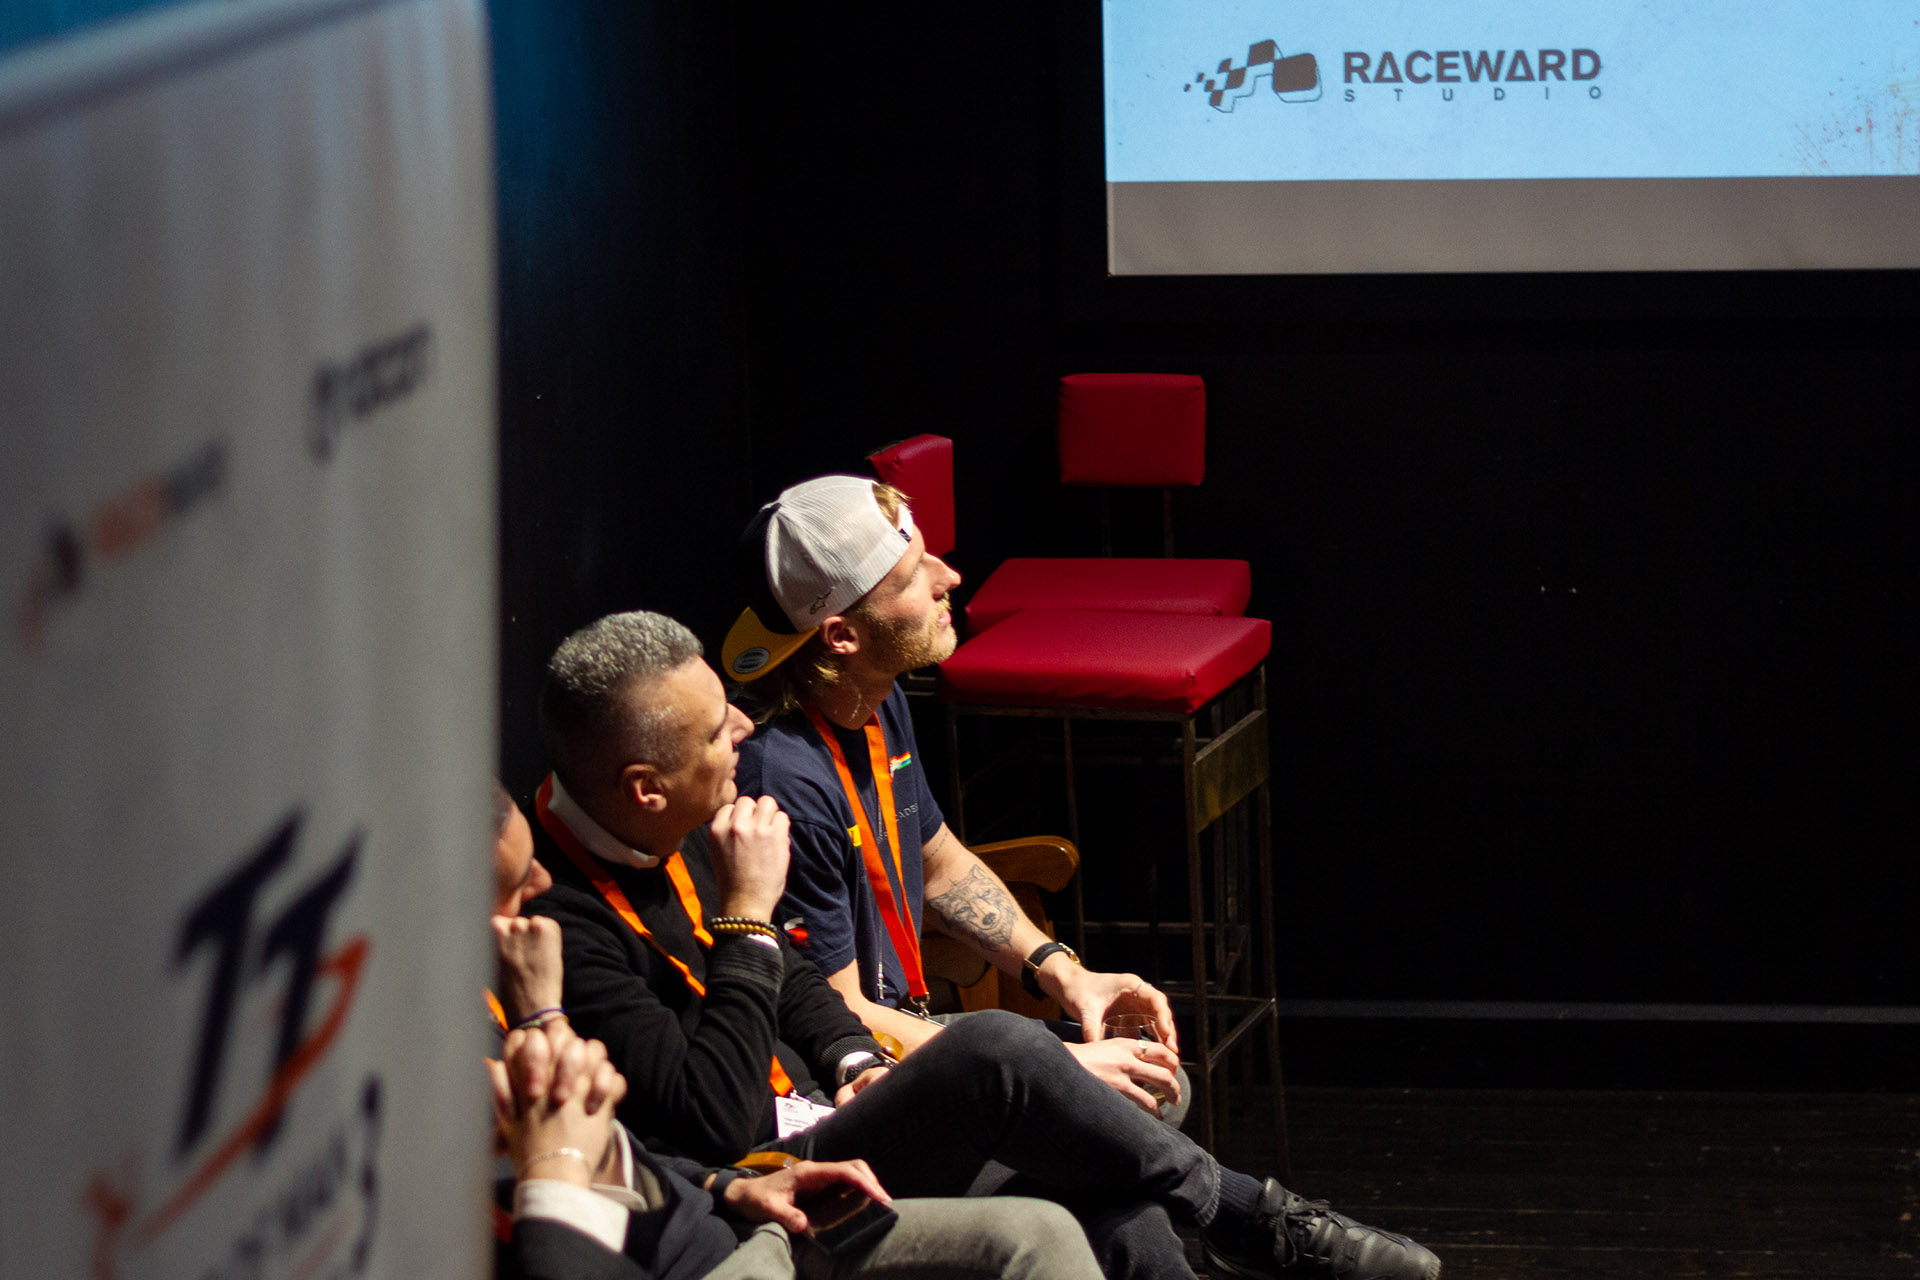 TT rider Davey Todd with RaceWard developers at the Preview Event in Milan